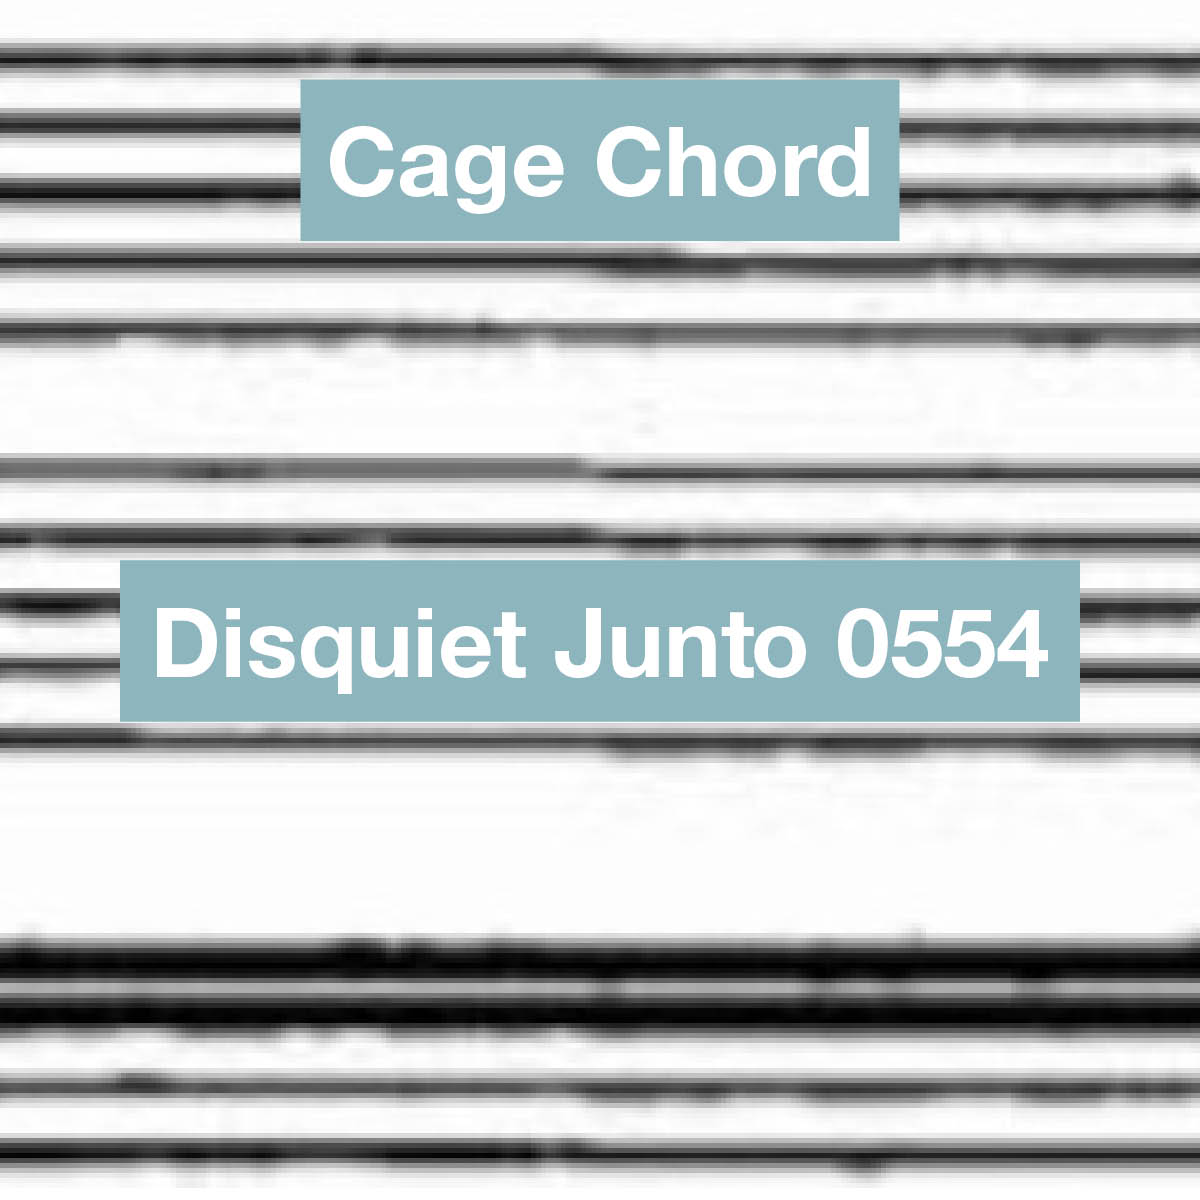 Messy Cage Chord Cover